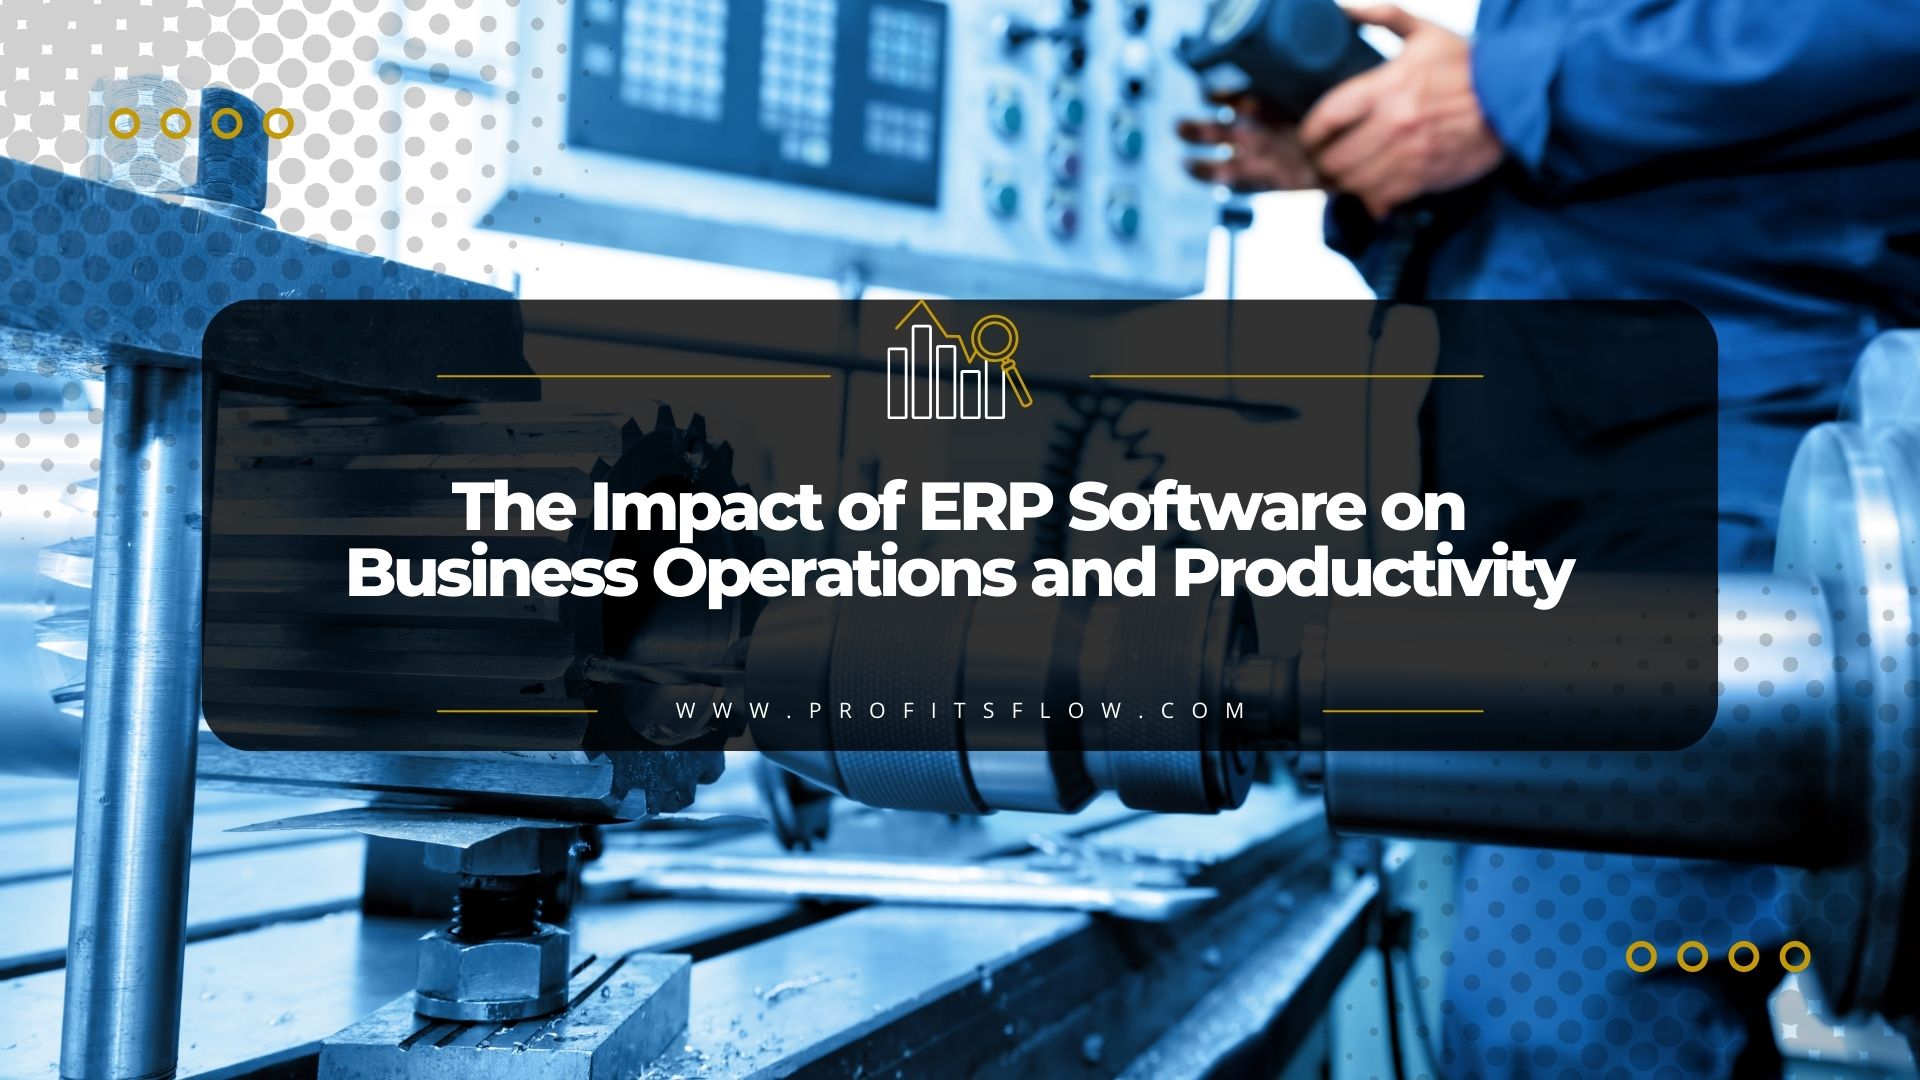 The Impact of ERP Software on Business Operations and Productivity